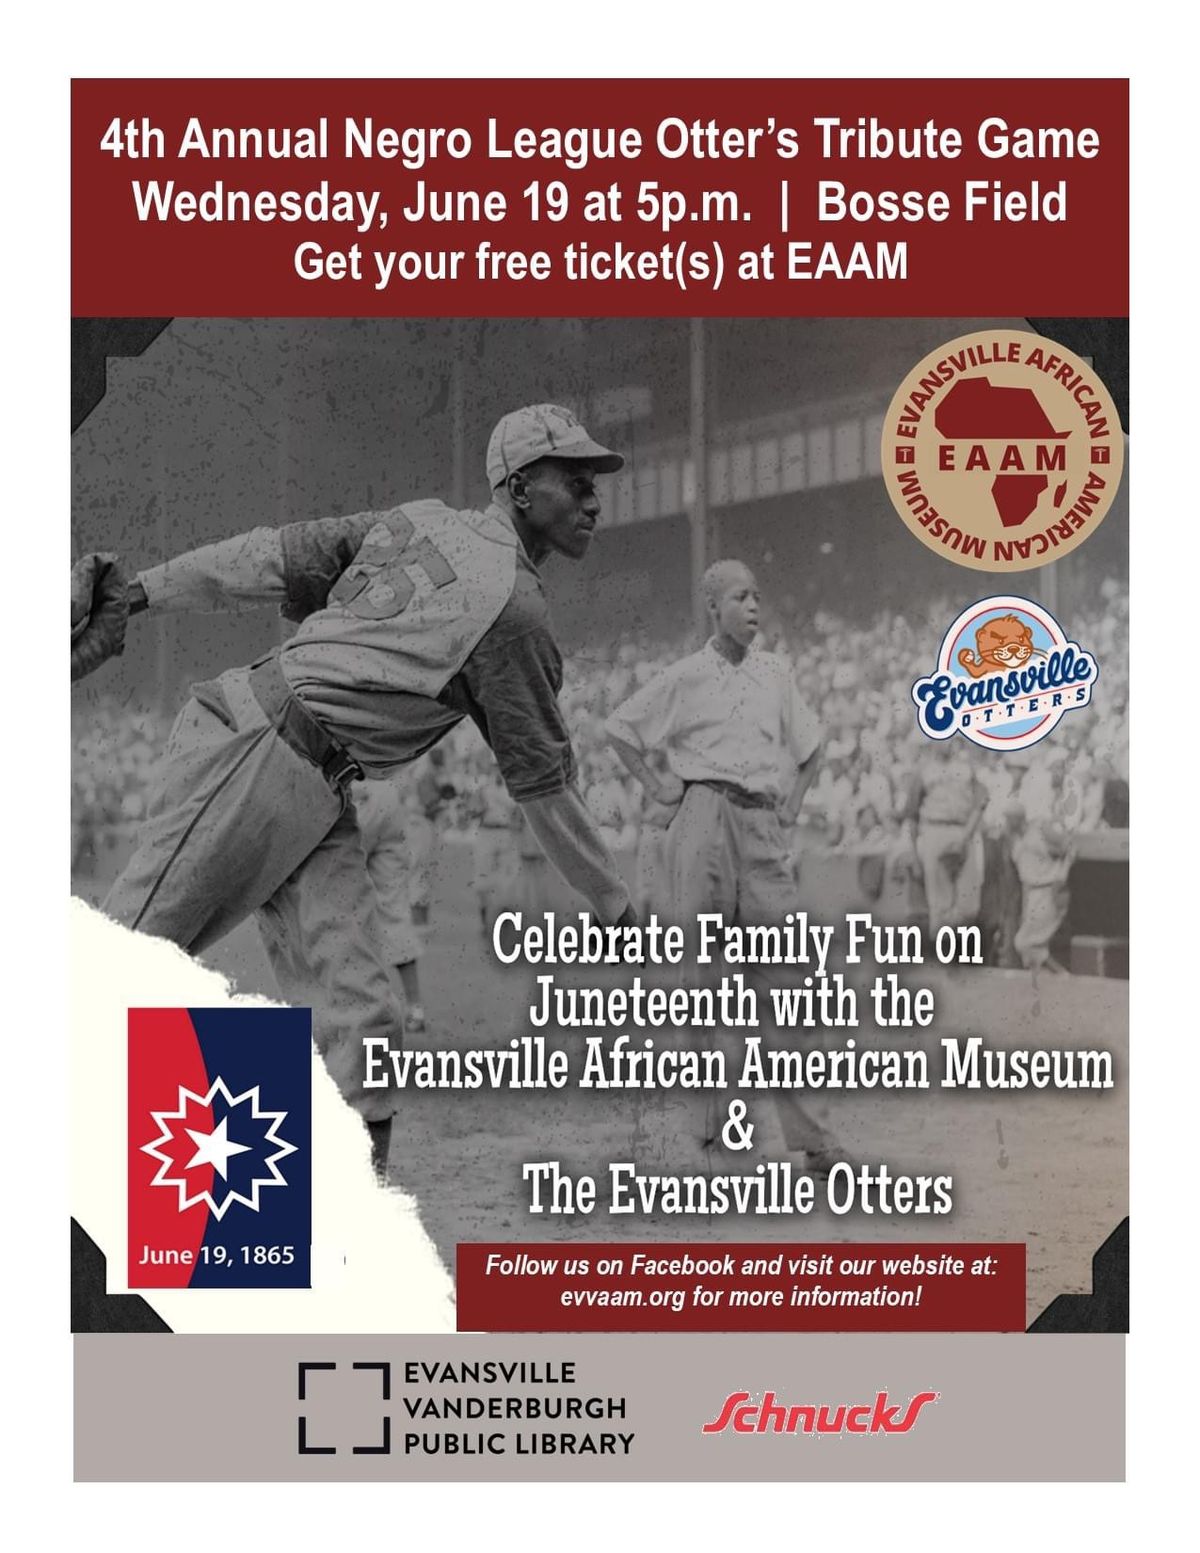 Supporting the Evansville African American Museum at the Otters